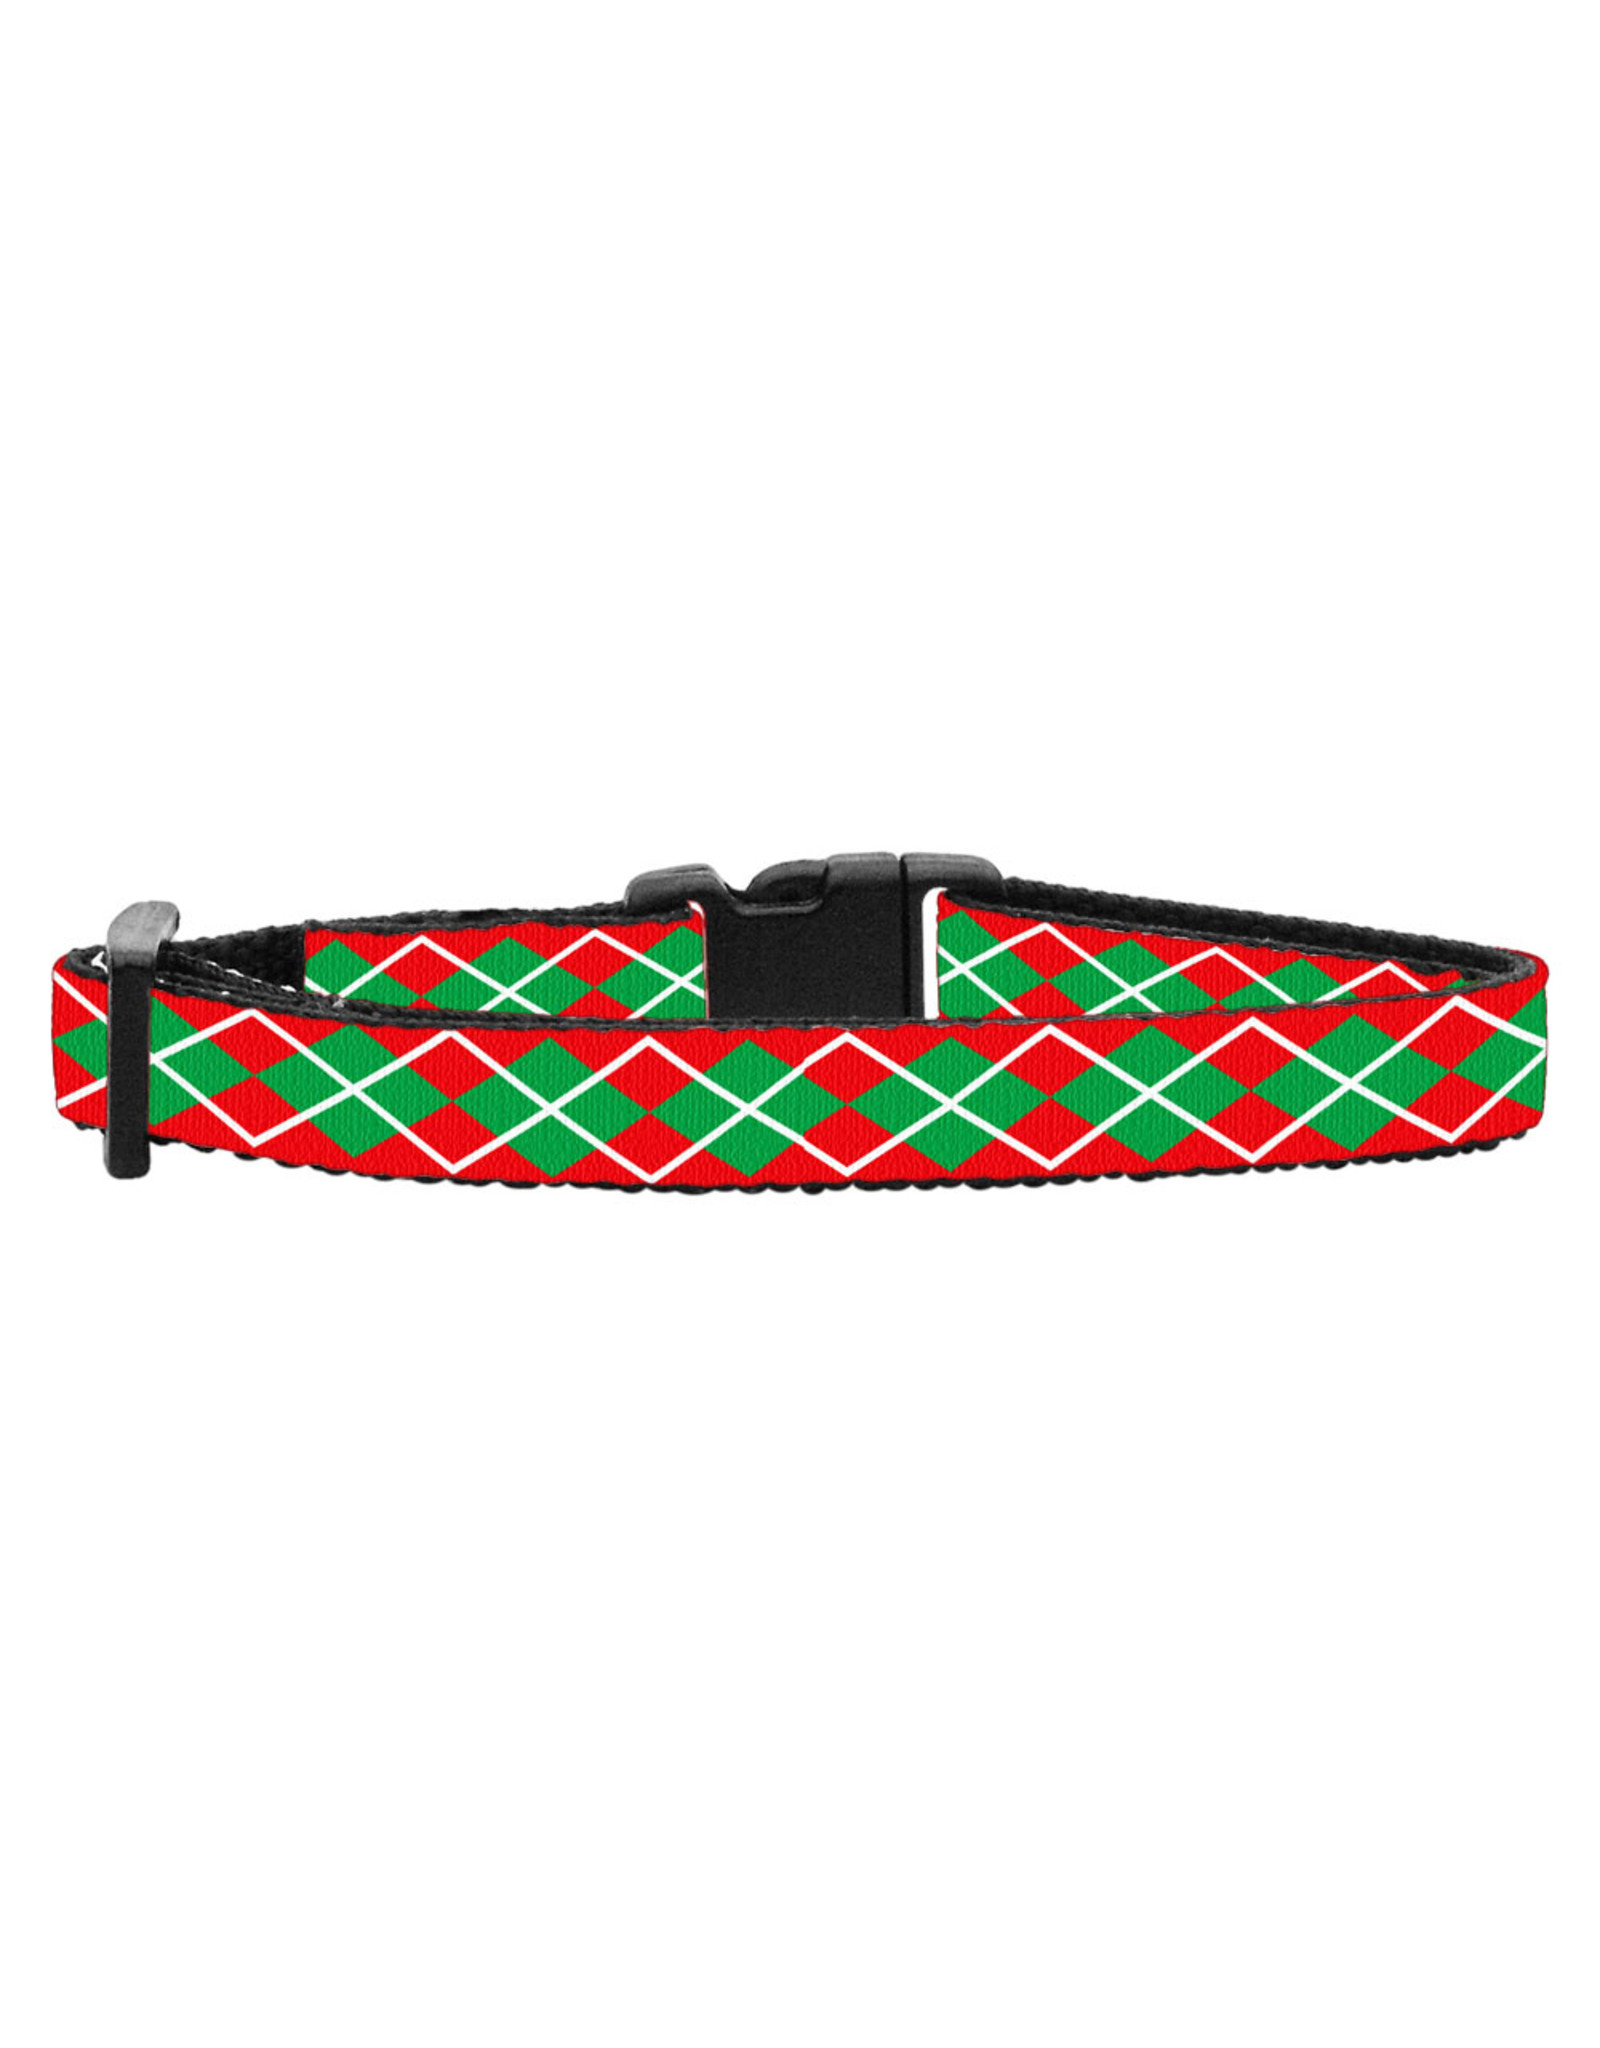 Mirage Pet Products Mirage Pet Products Holiday Cat Collars